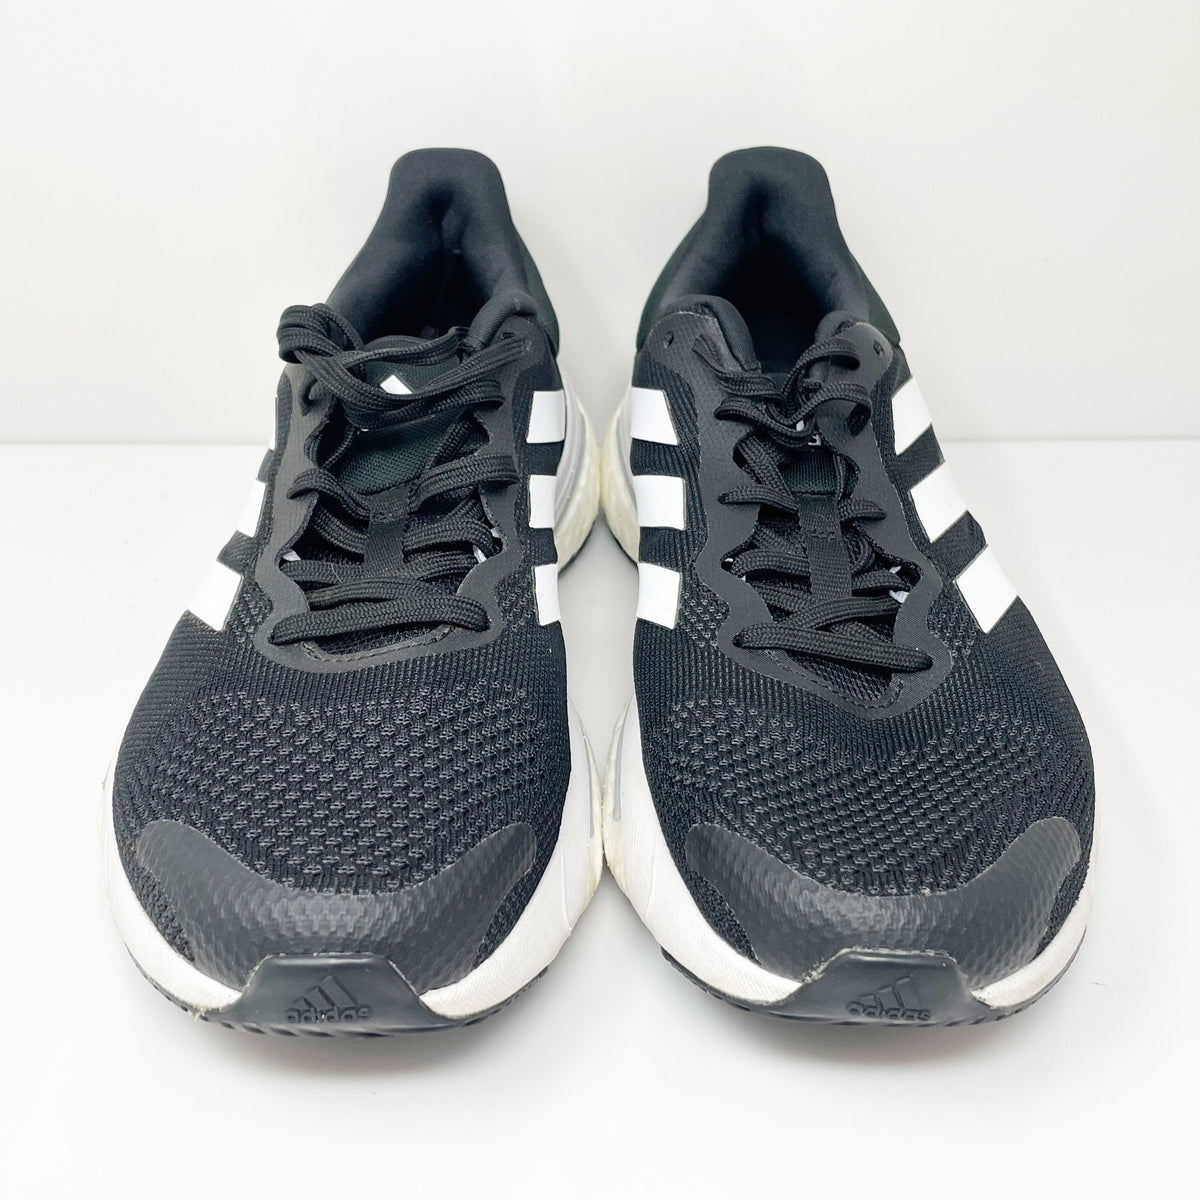 Adidas Mens Solarglide 5 GX5493 Black Running Shoes Sneakers Size 8 ...